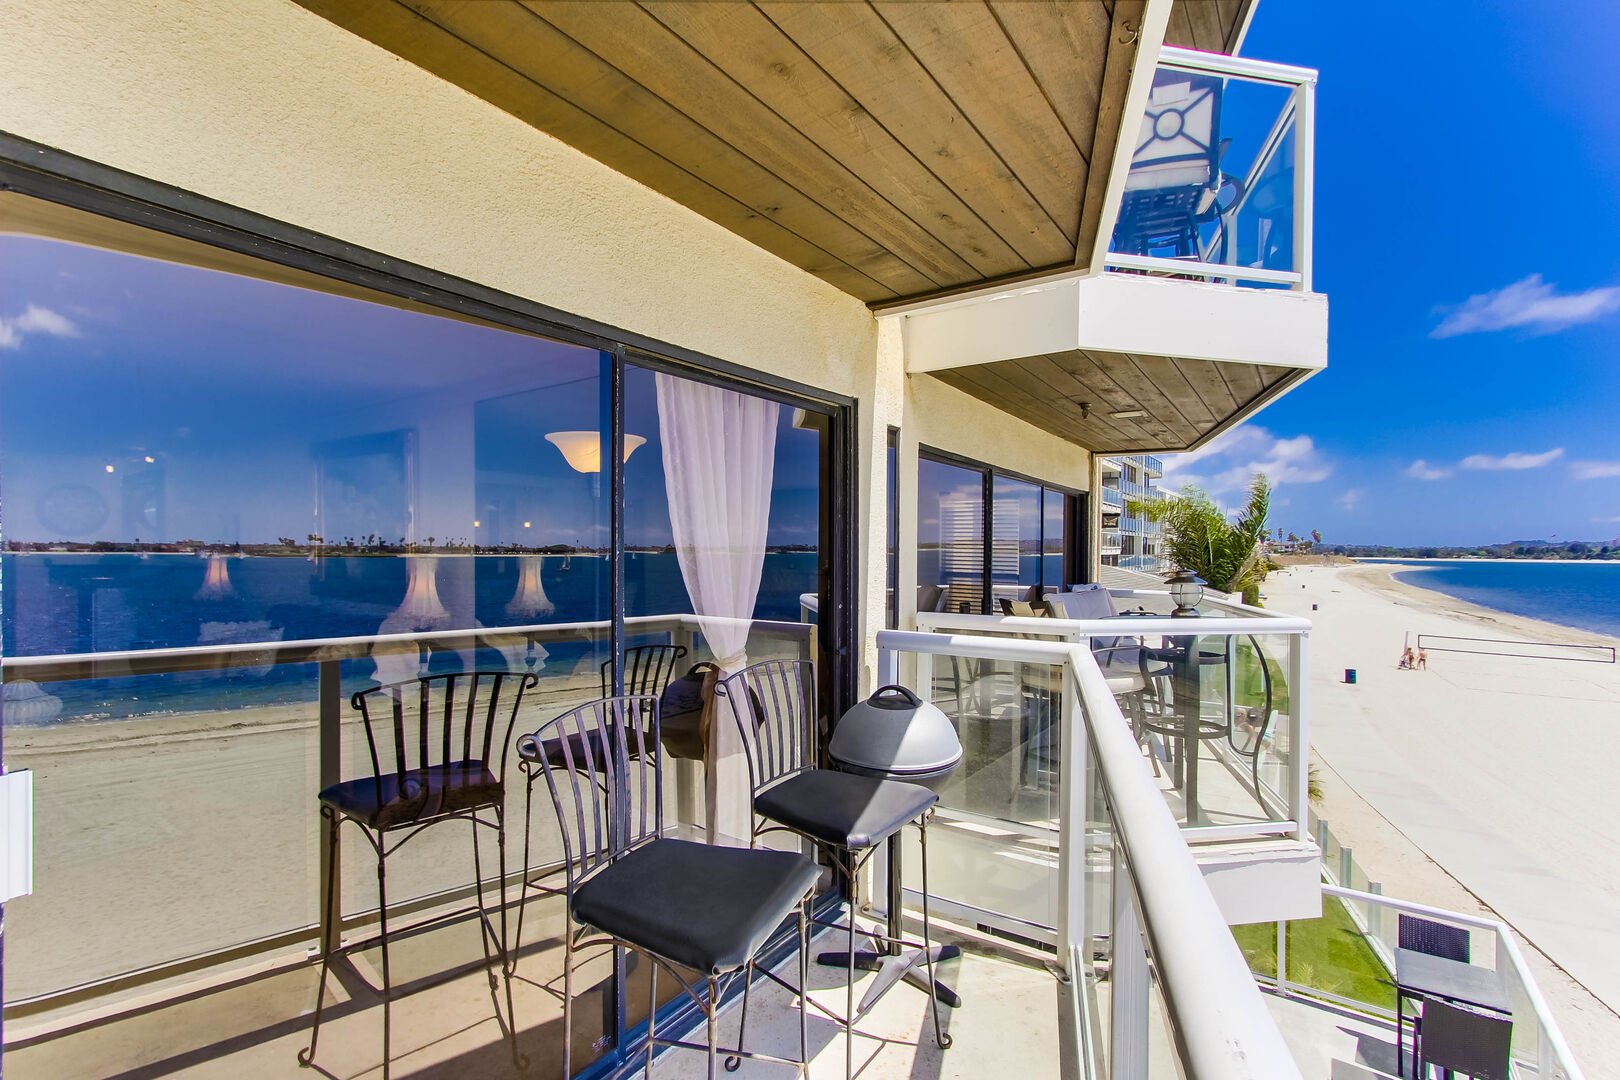 Balcony to the bay with seating for 2